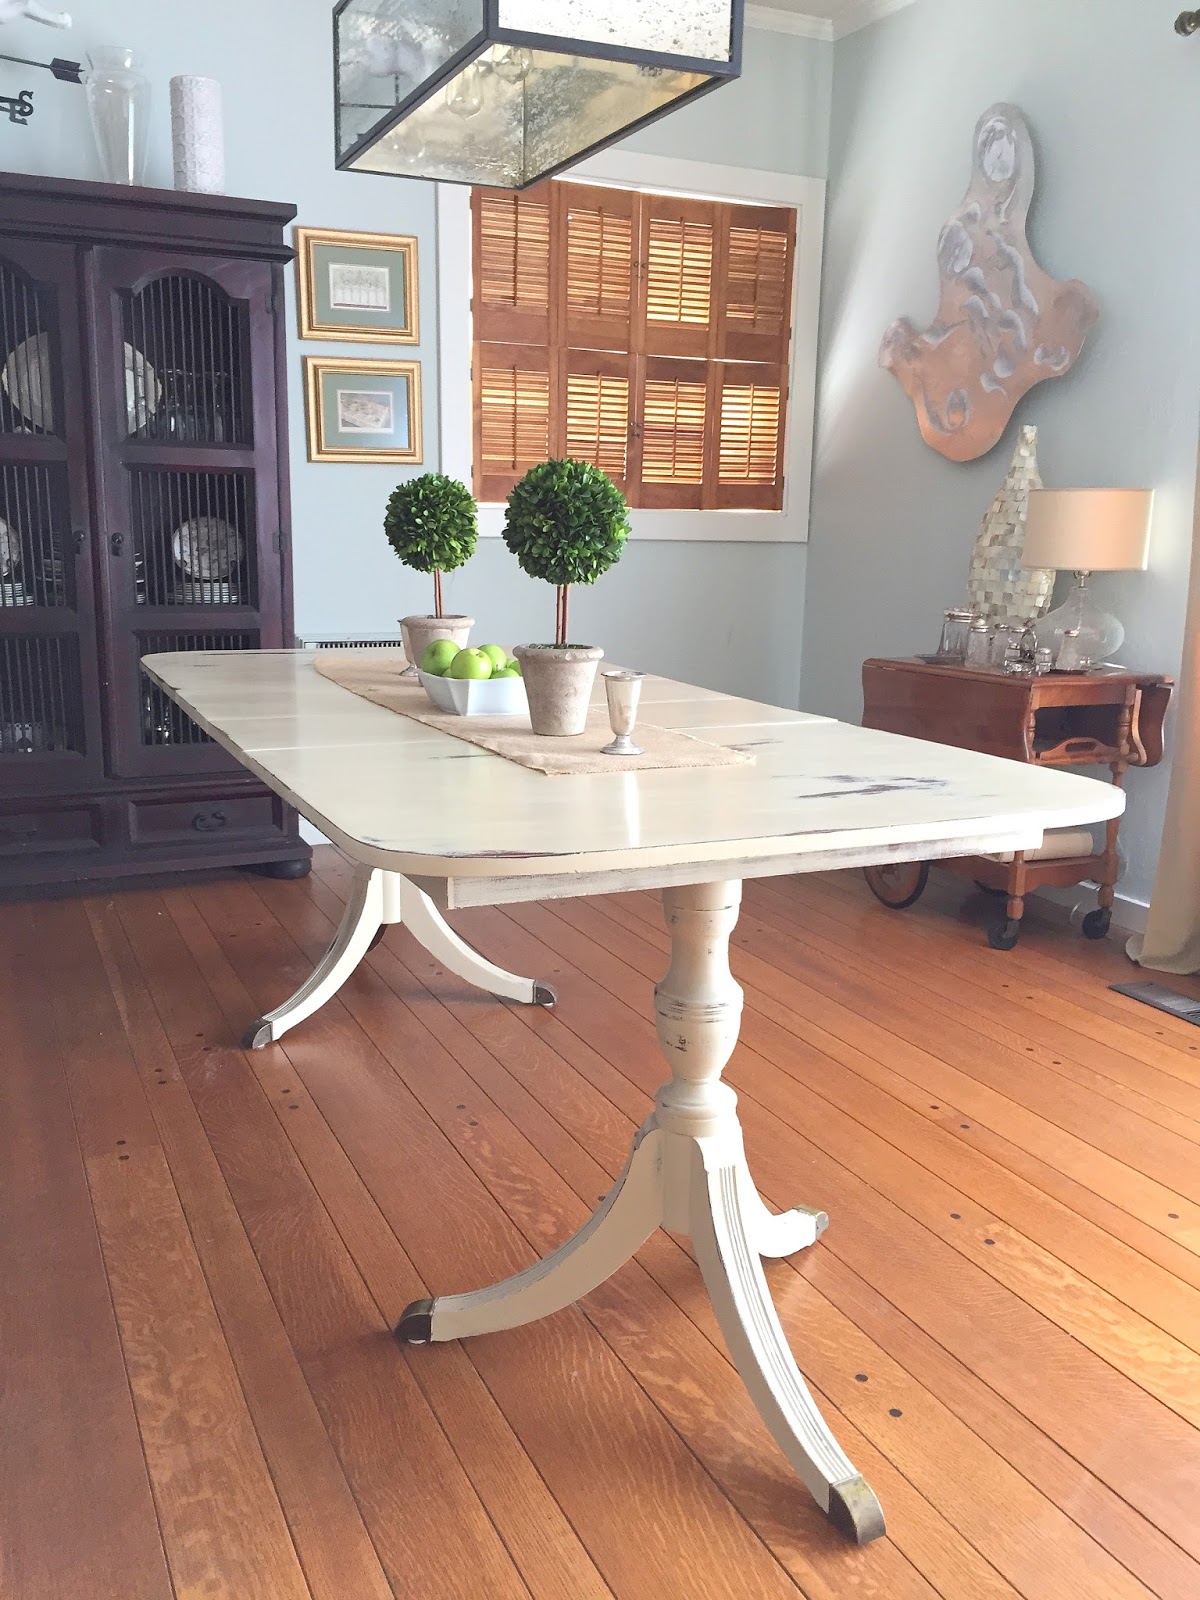 New How To Paint Dining Room Furniture for Large Space